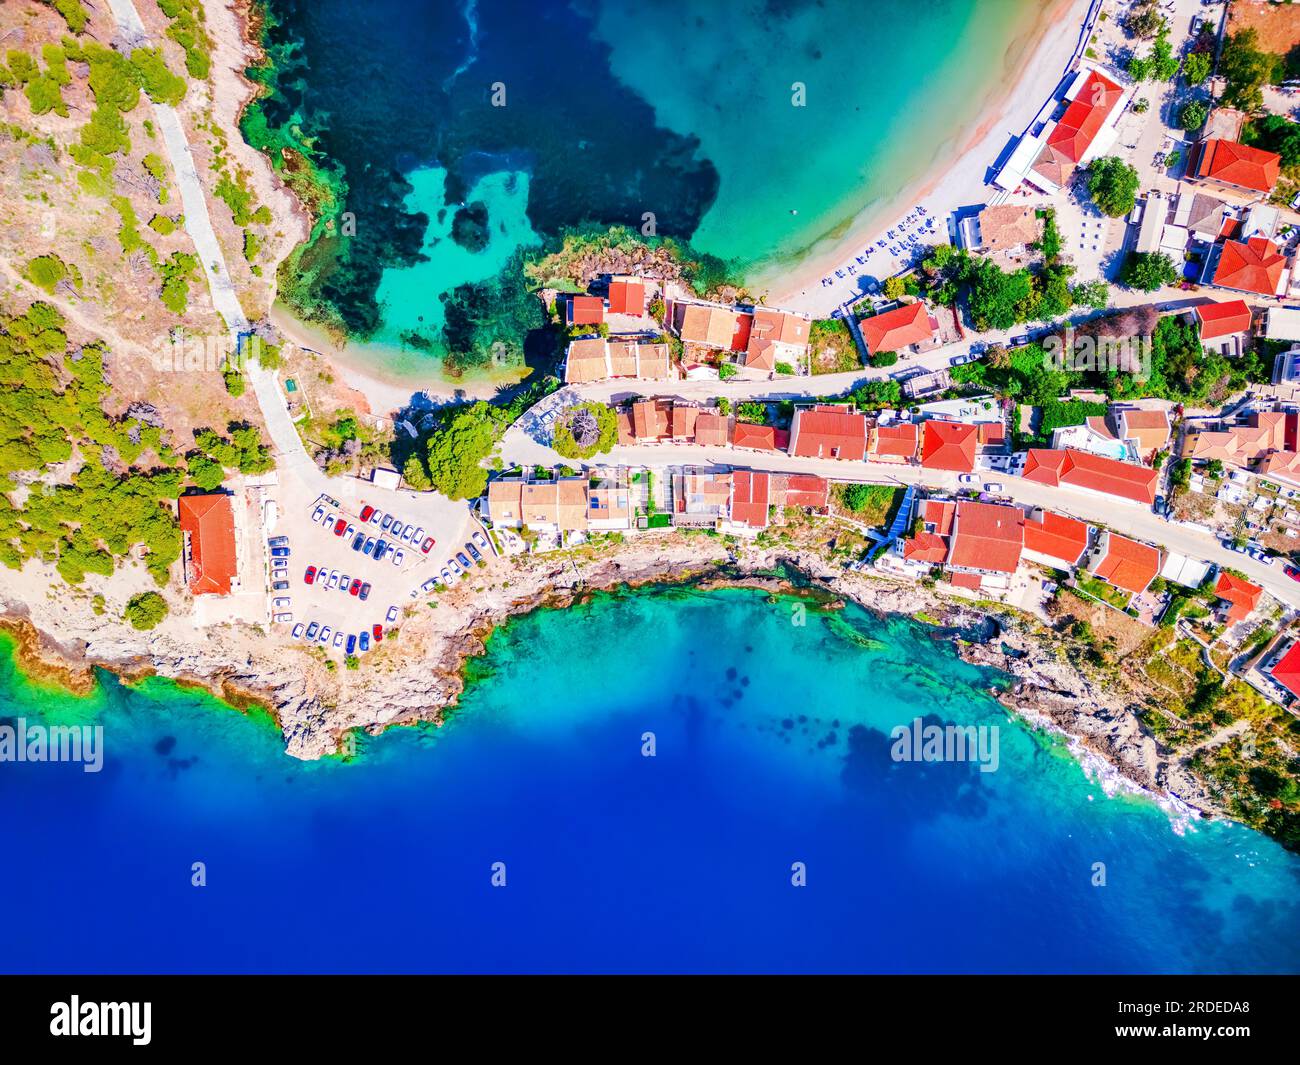 Assos, Greece. Aerial view of picturesque village, colorful houses and turquoise colored bay. Idyllic Kefalonia, Ionian islands. Stock Photo